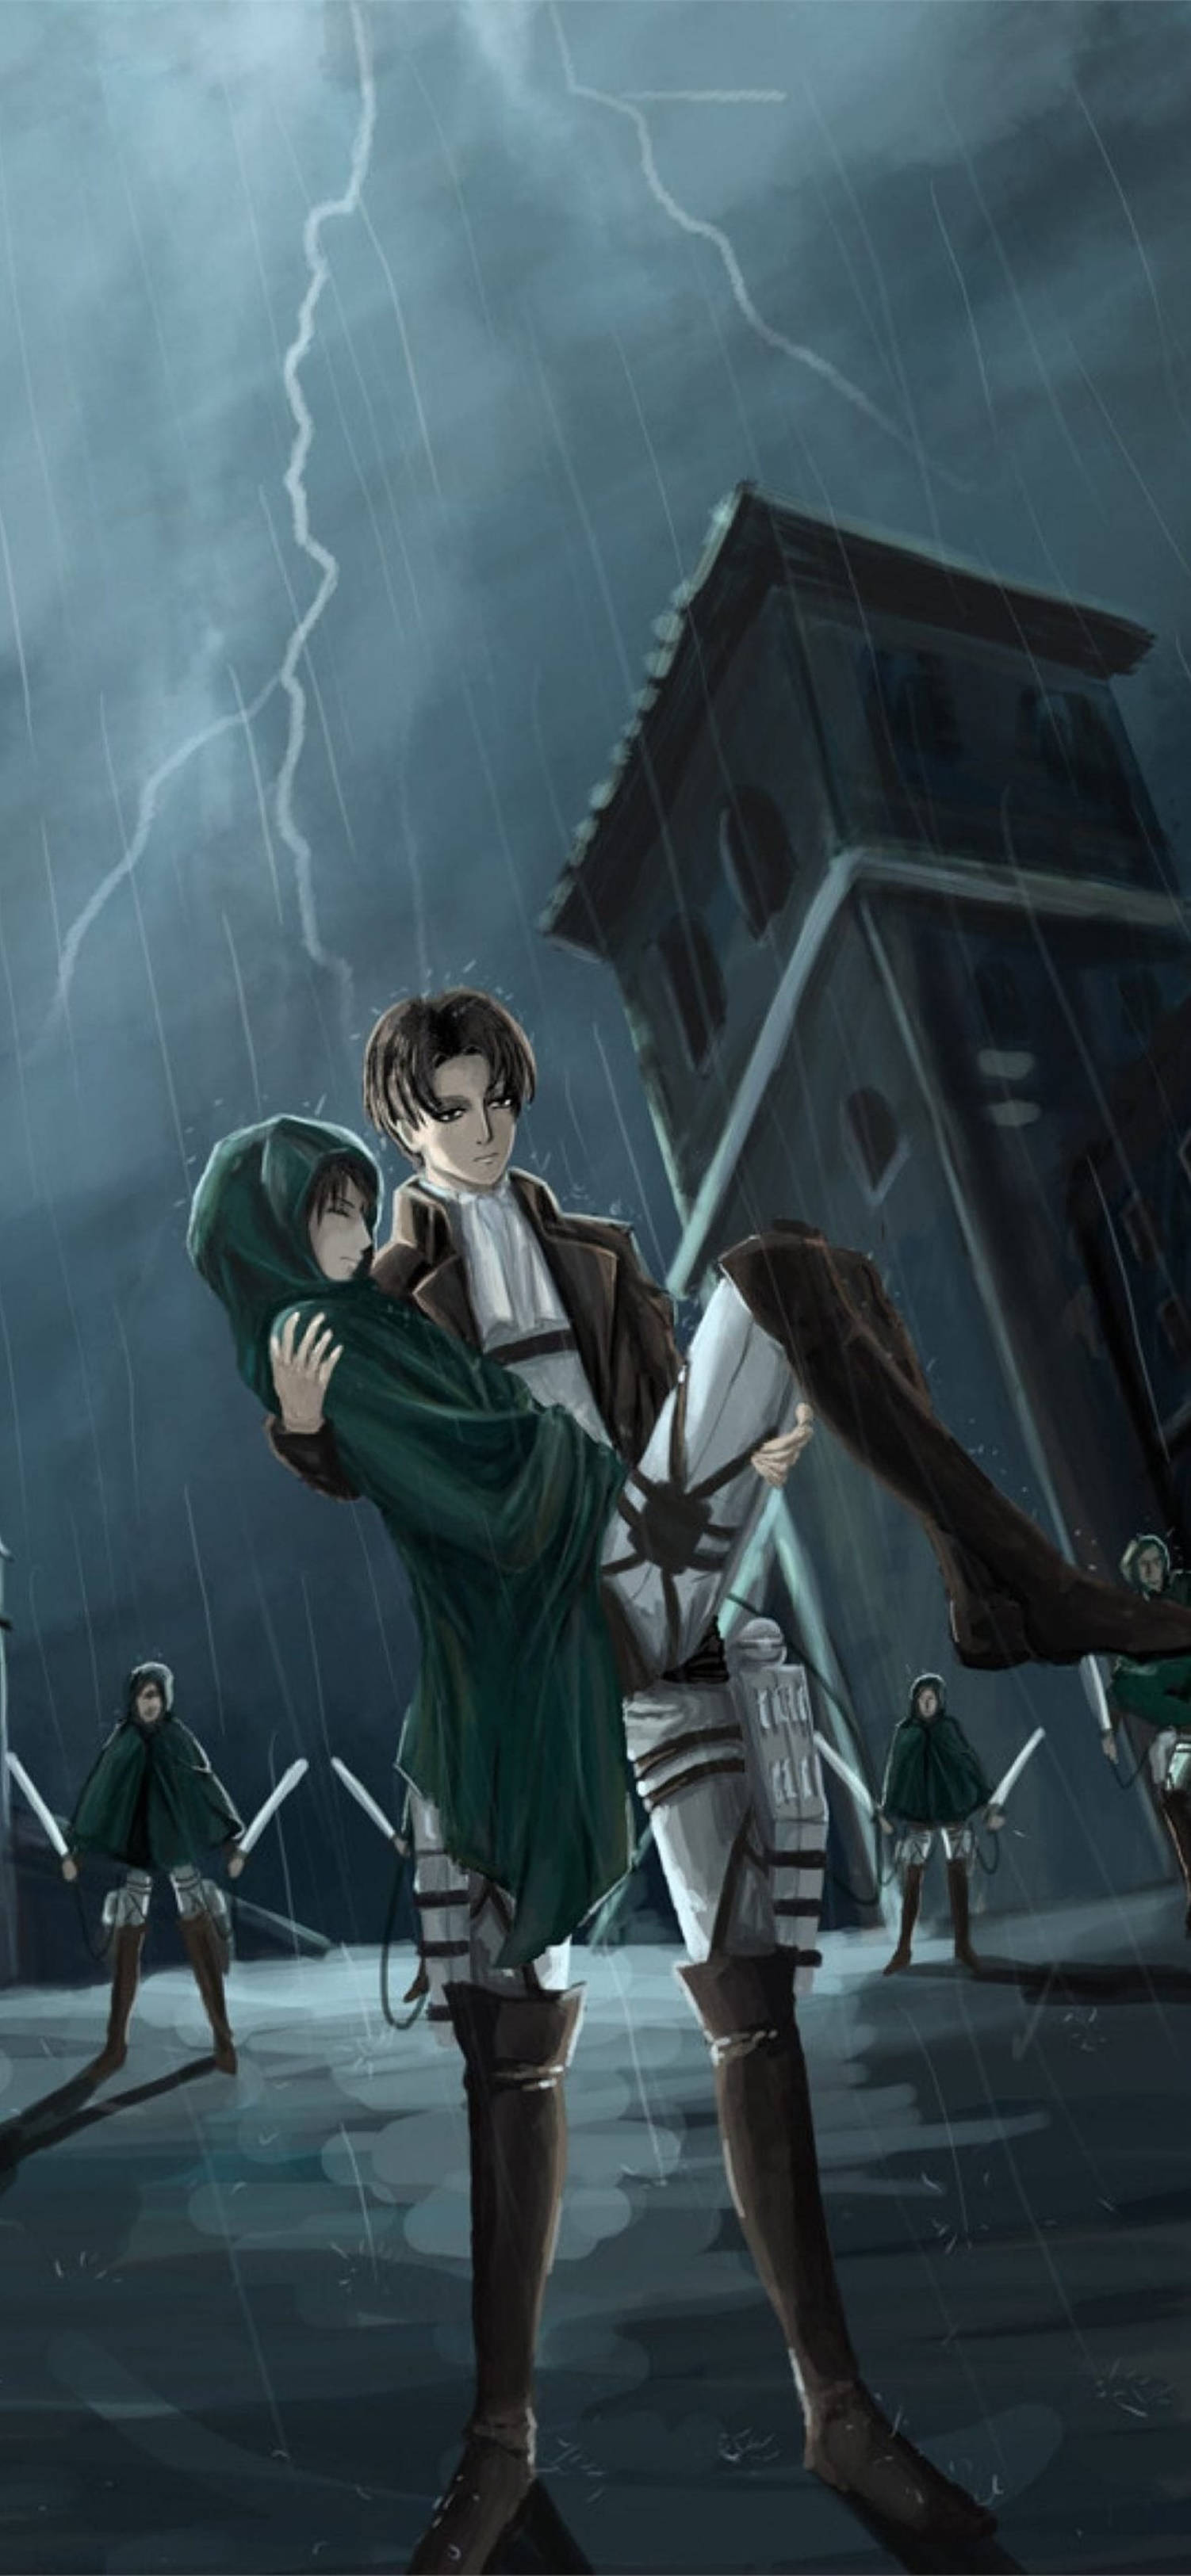 Titan Battles In High Definition: Levi And Mikasa Ackerman In Action In Aot 4k